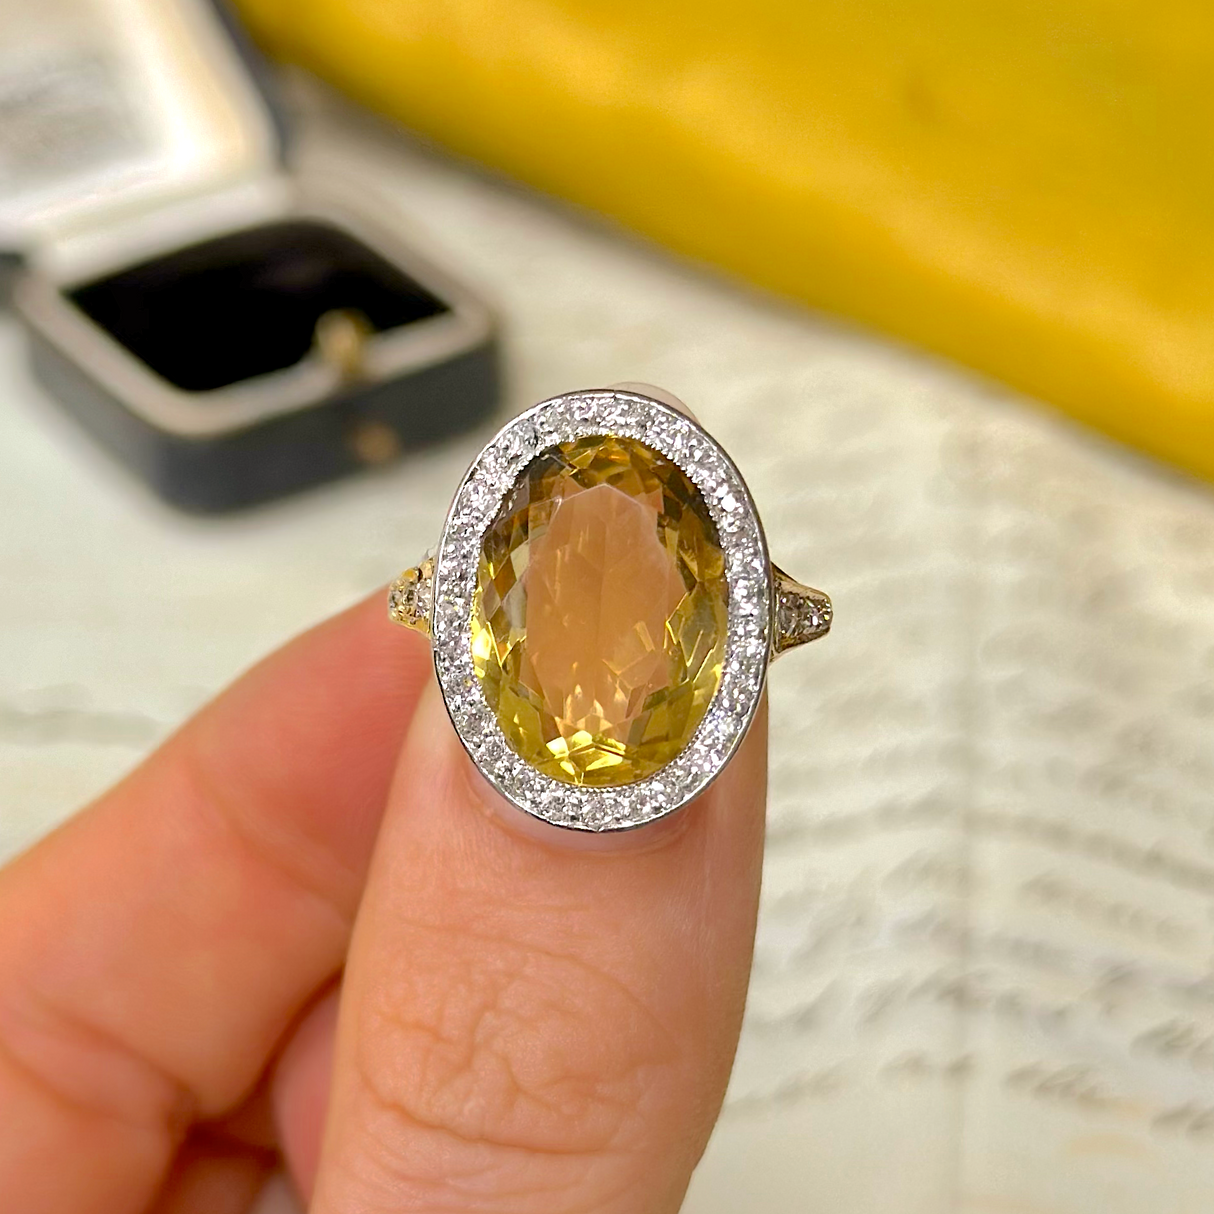 Vintage, Citrine and Diamond Cluster Ring, 18ct Yellow Gold and Platinum in fingers.